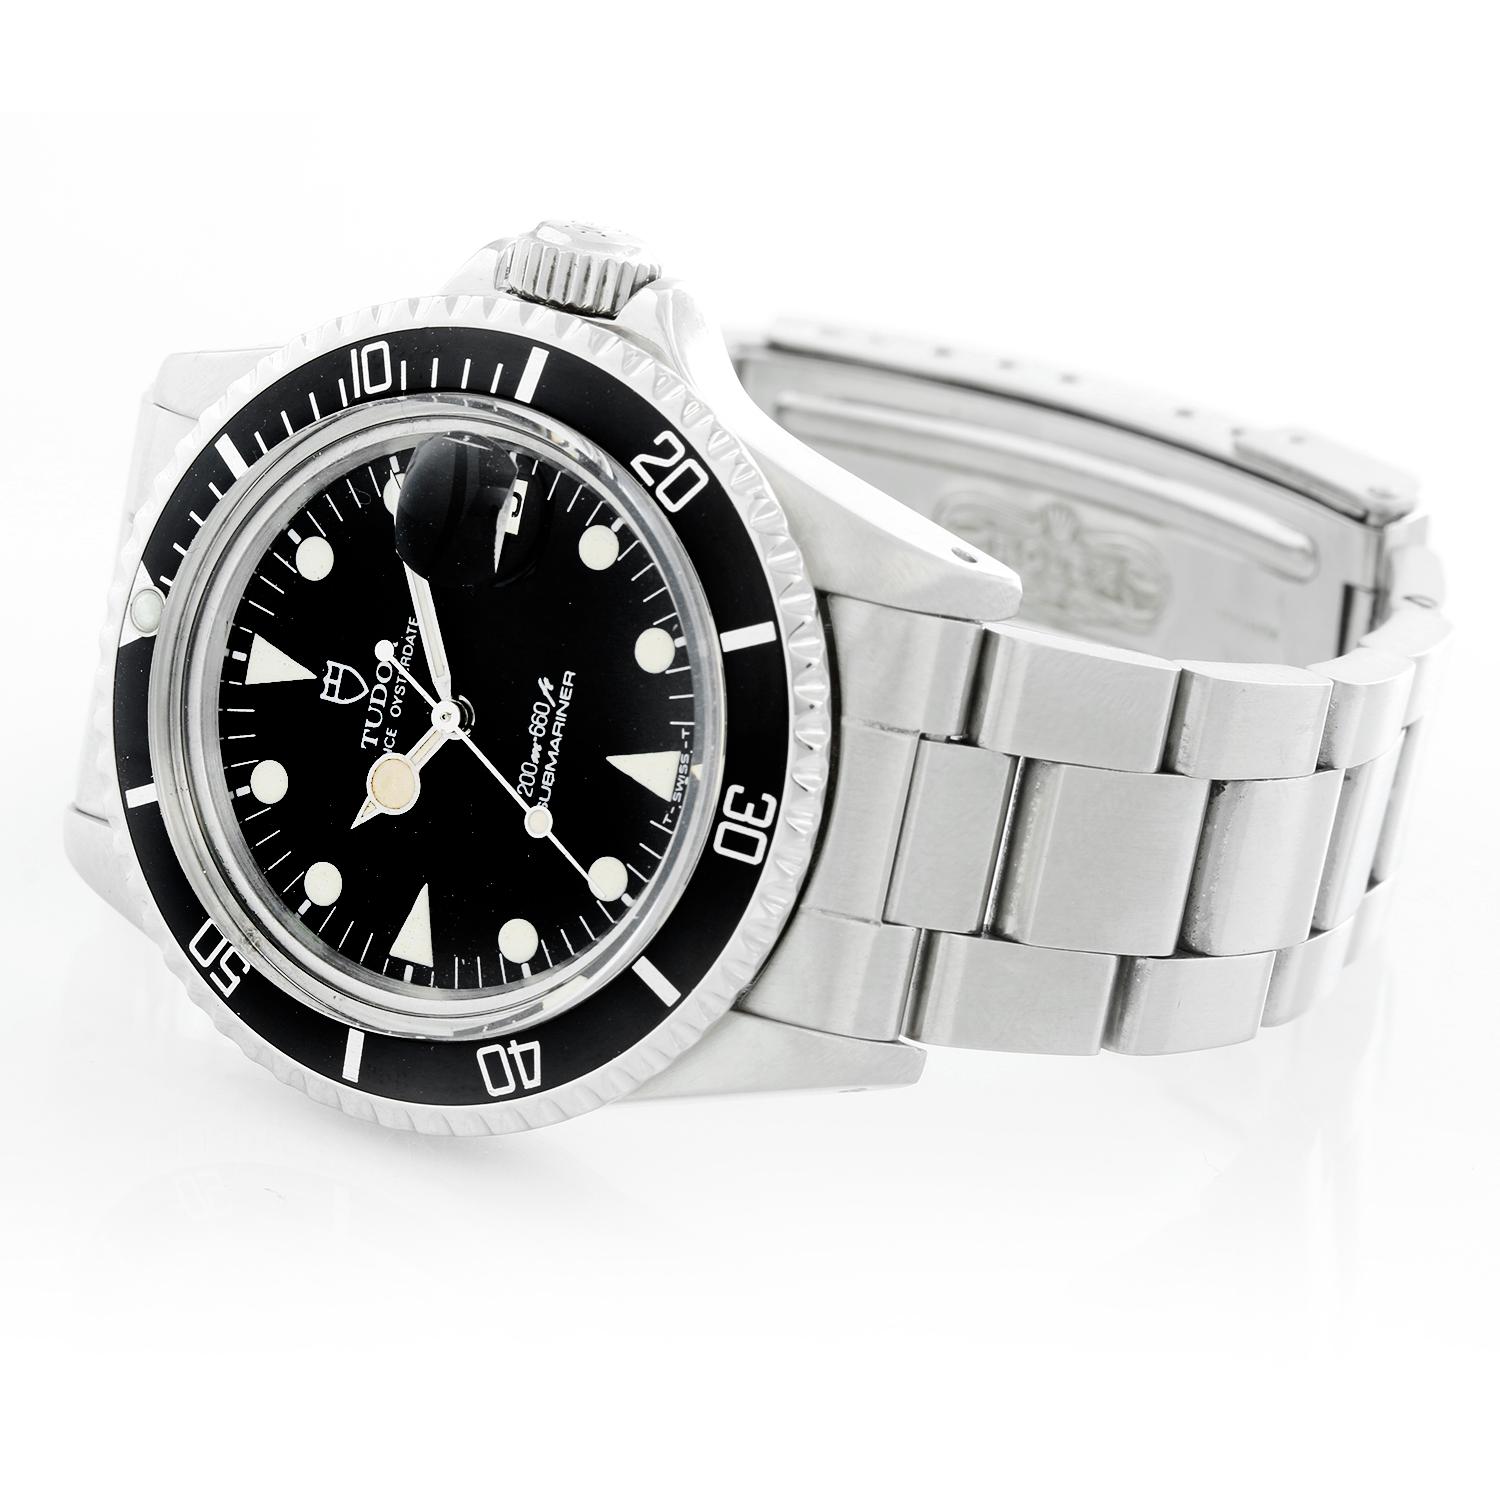 Vintage Tudor Submariner Ref. 76100 Men's Watch - Automatic winding. Stainless steel ( 40 mm ) with time lapse rotating bezel. Black dial with luminous hour markers. Stainless steel Oyster bracelet with flip lock clasp. Pre-owned with custom box.